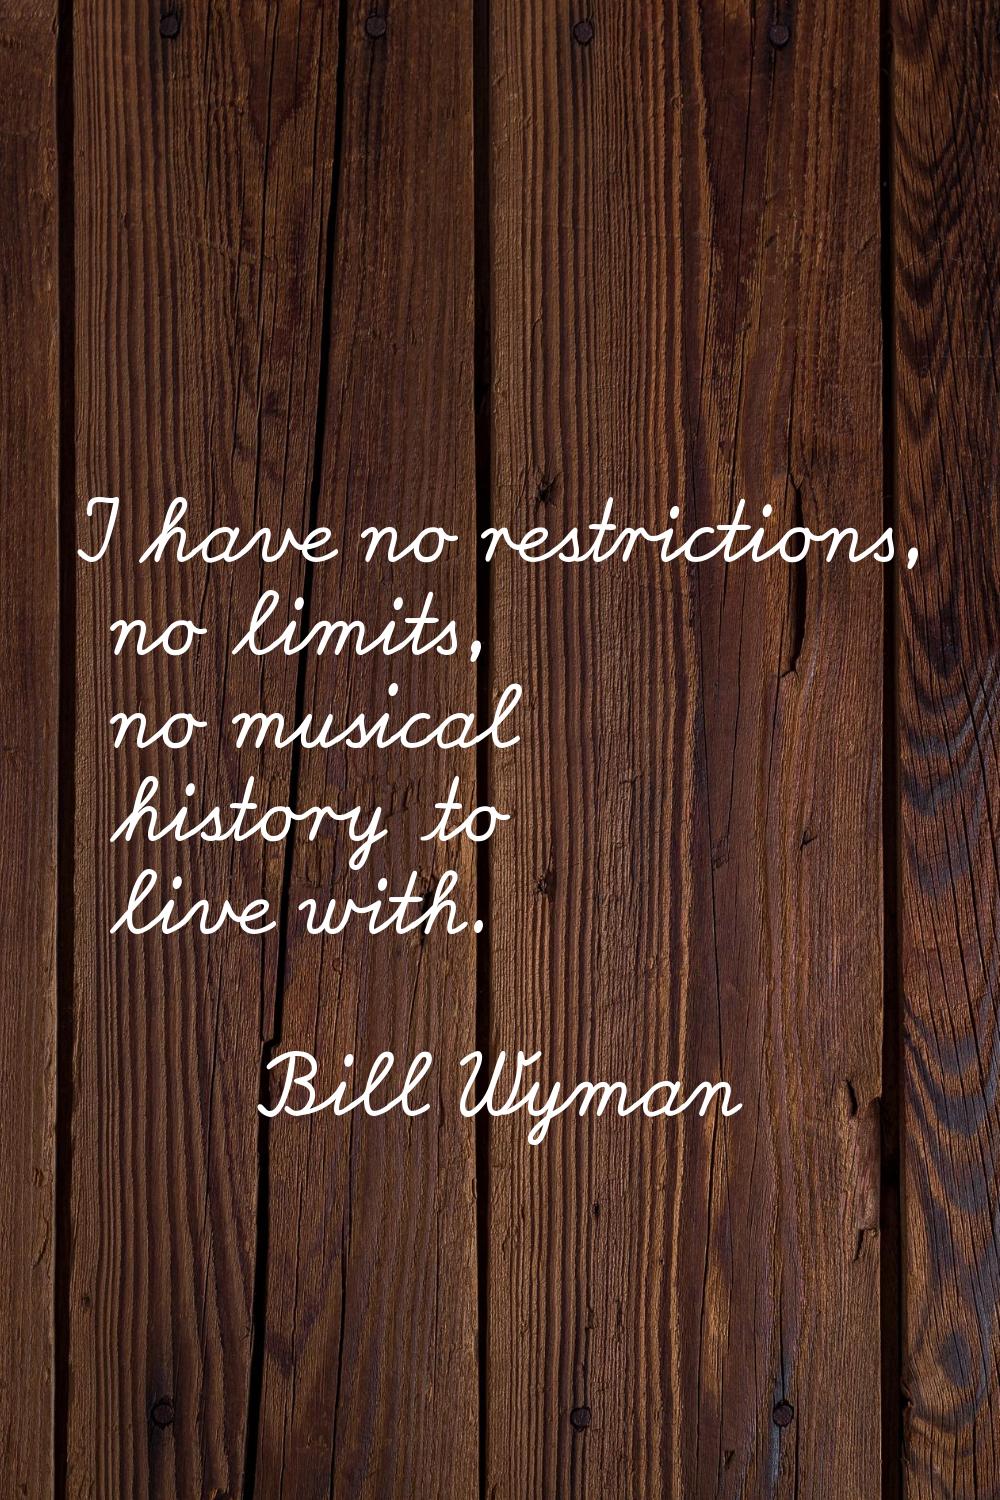 I have no restrictions, no limits, no musical history to live with.